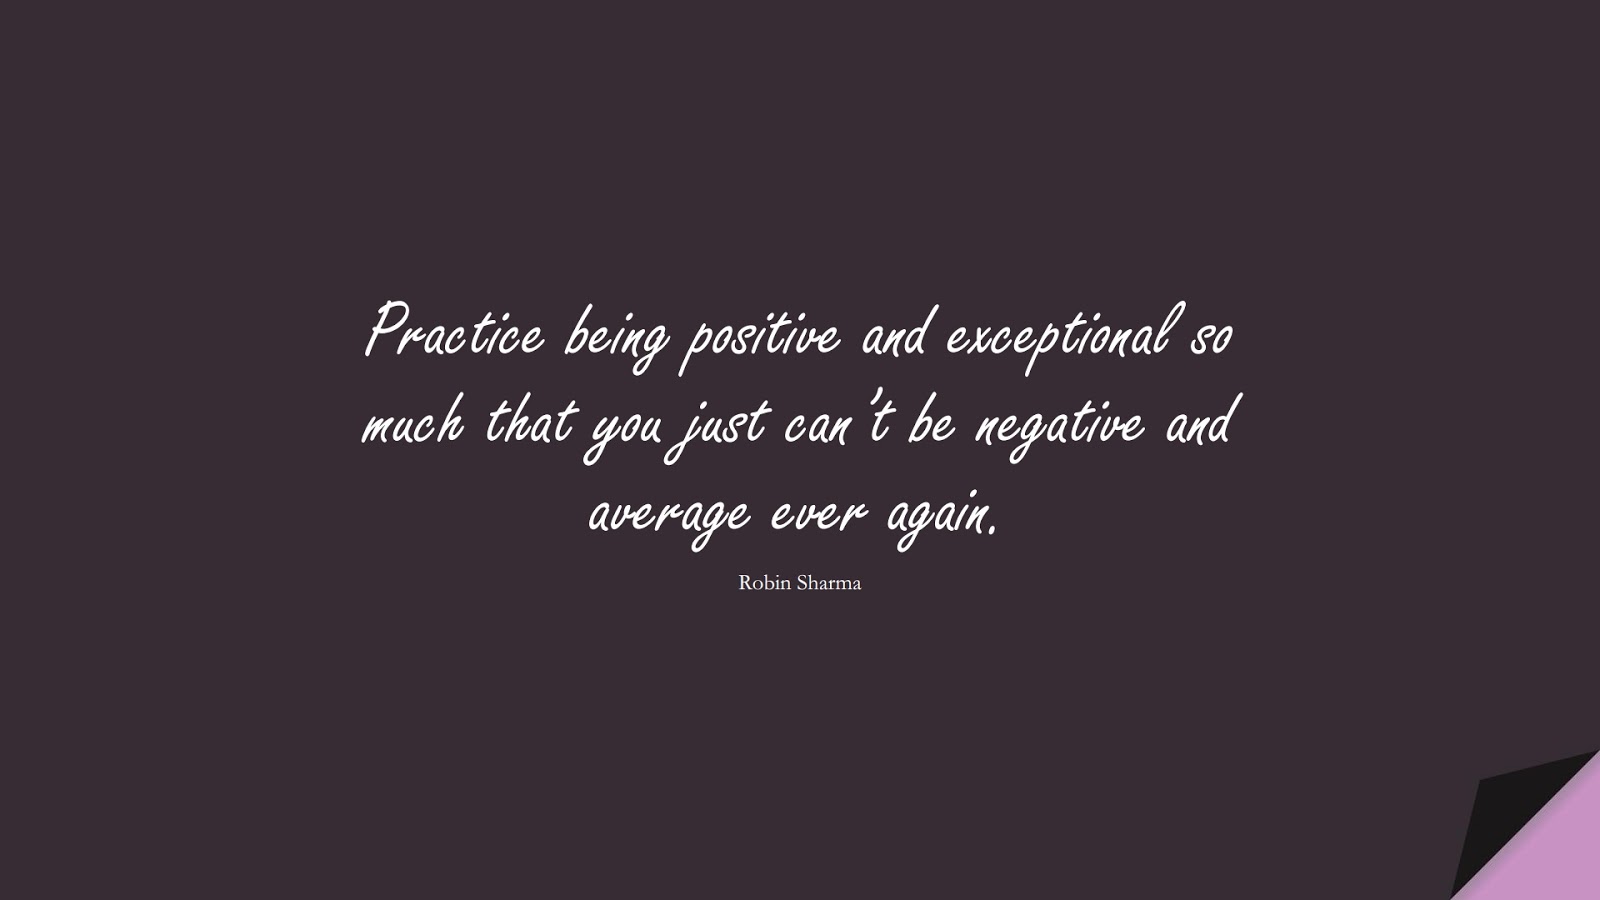 Practice being positive and exceptional so much that you just can’t be negative and average ever again. (Robin Sharma);  #PositiveQuotes